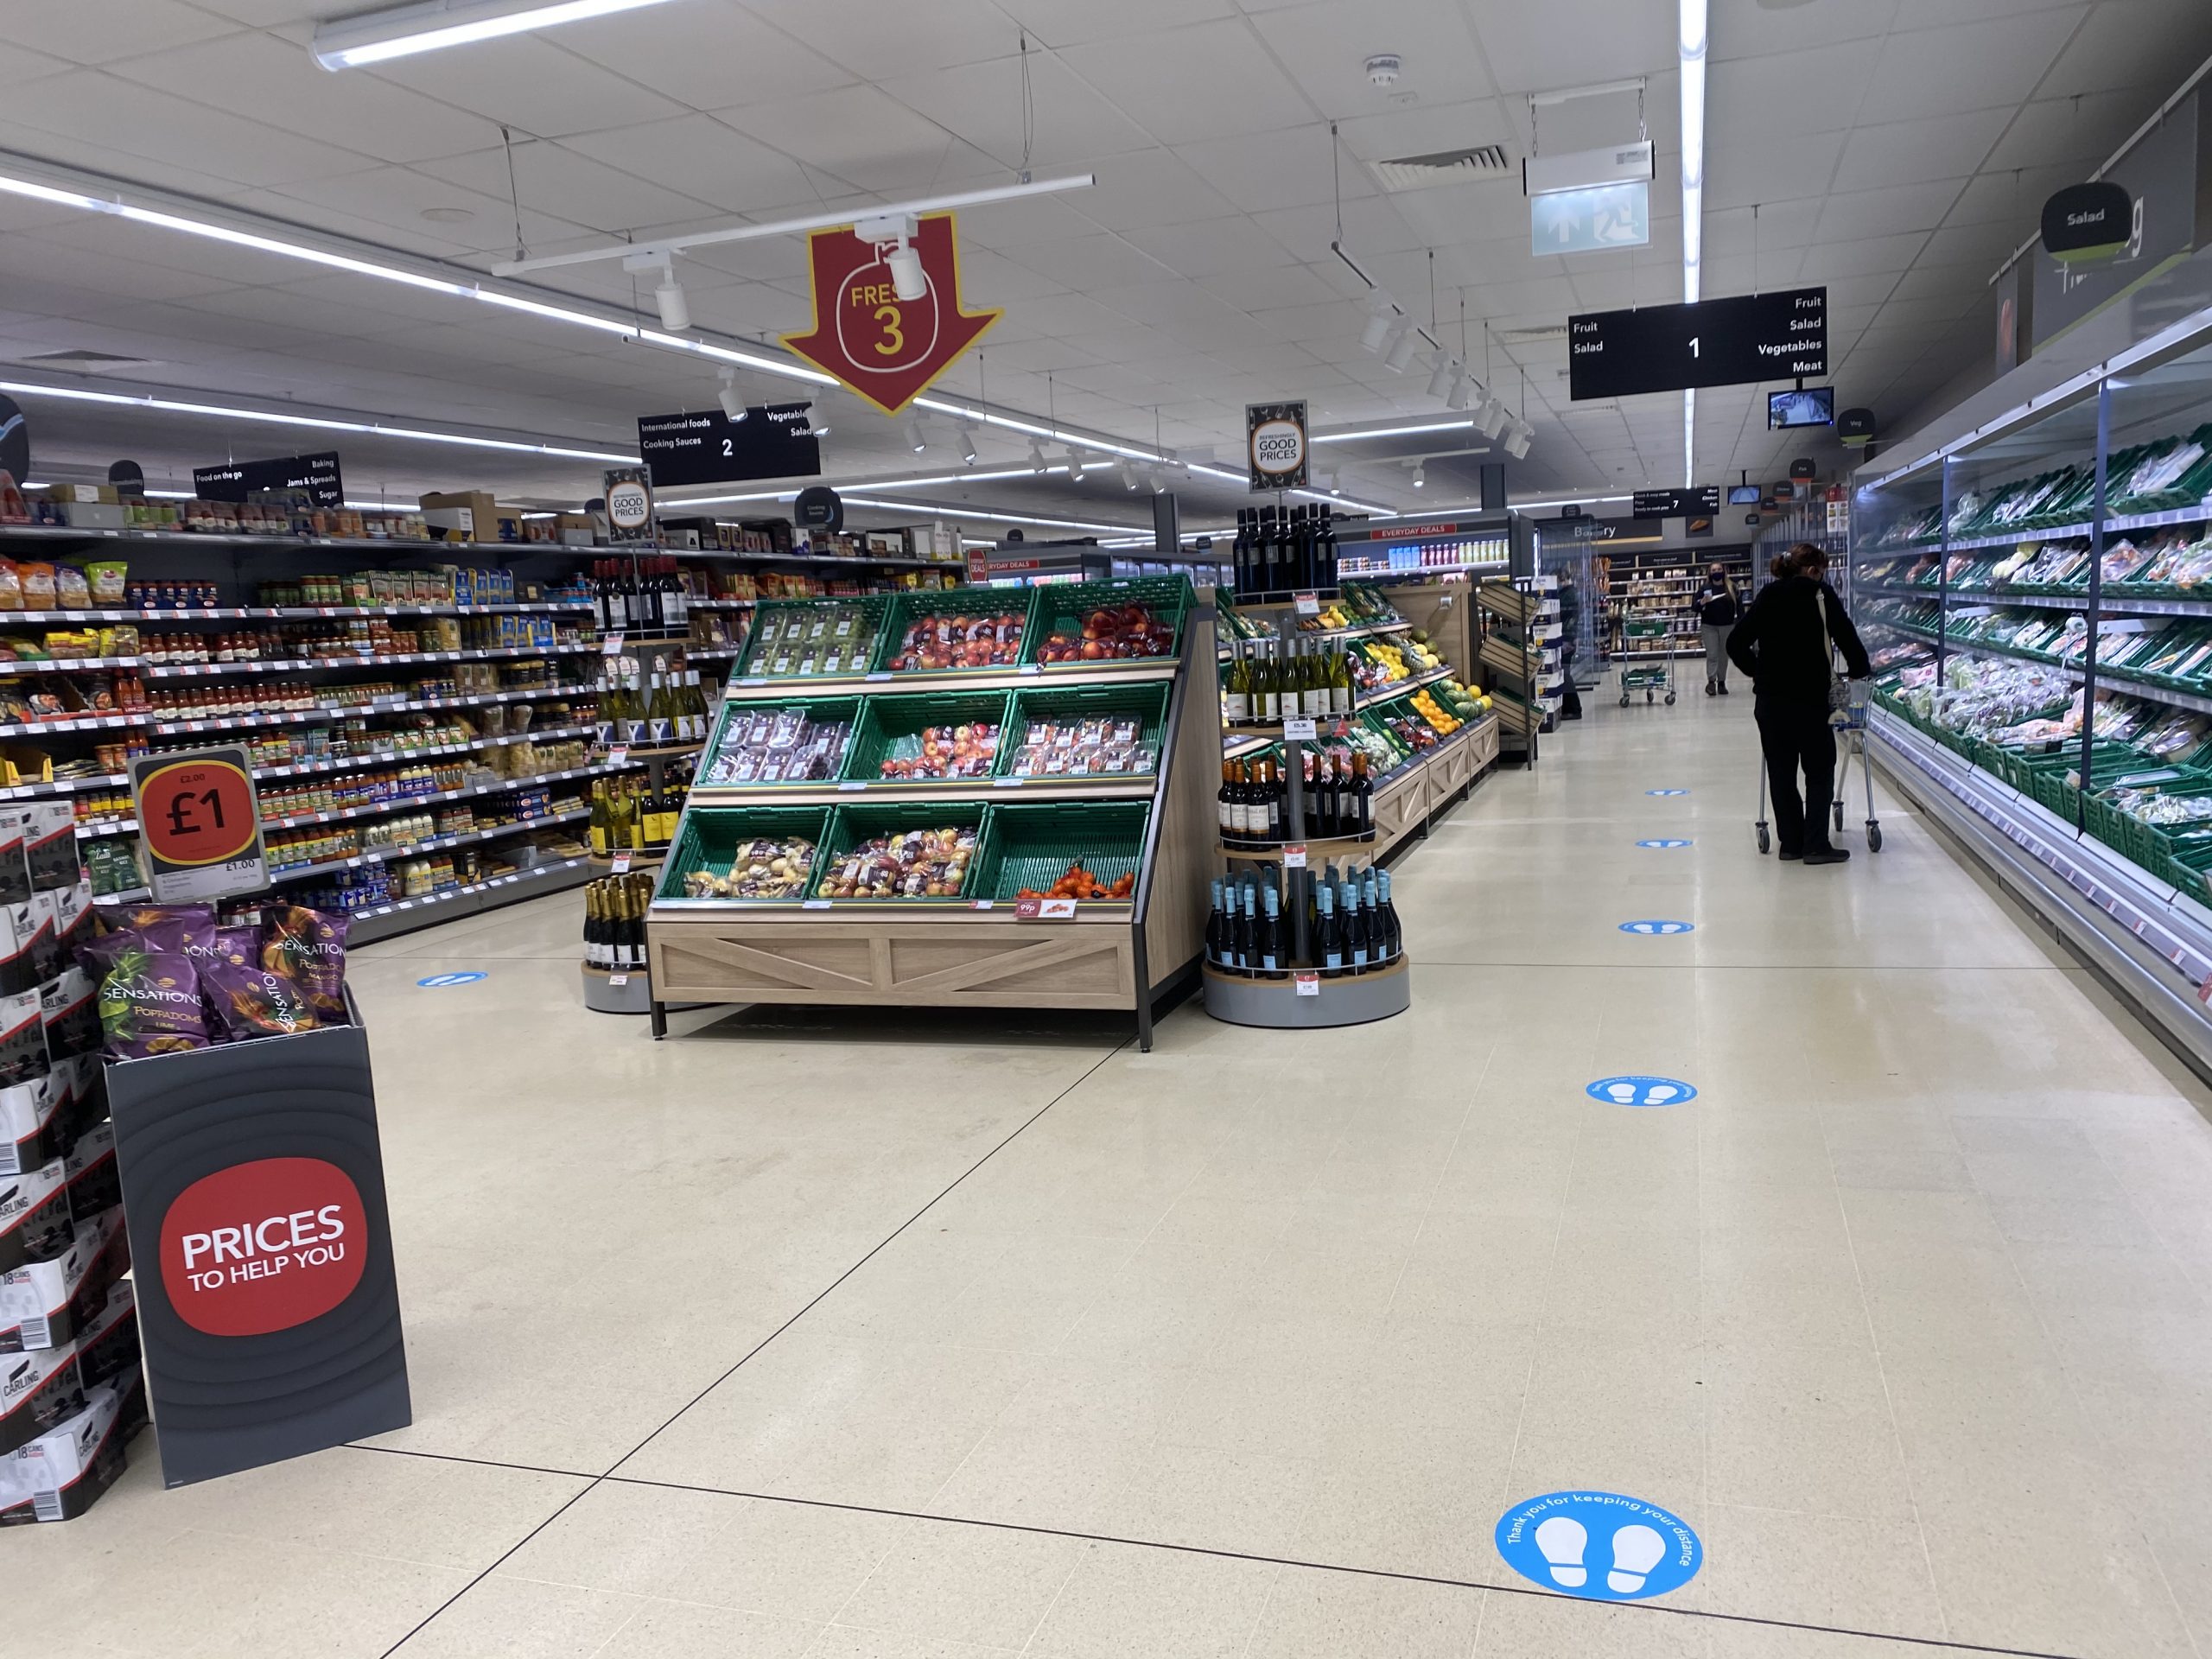 NEWS | Co-op store in Hereford delights shoppers following £1.5 million investment